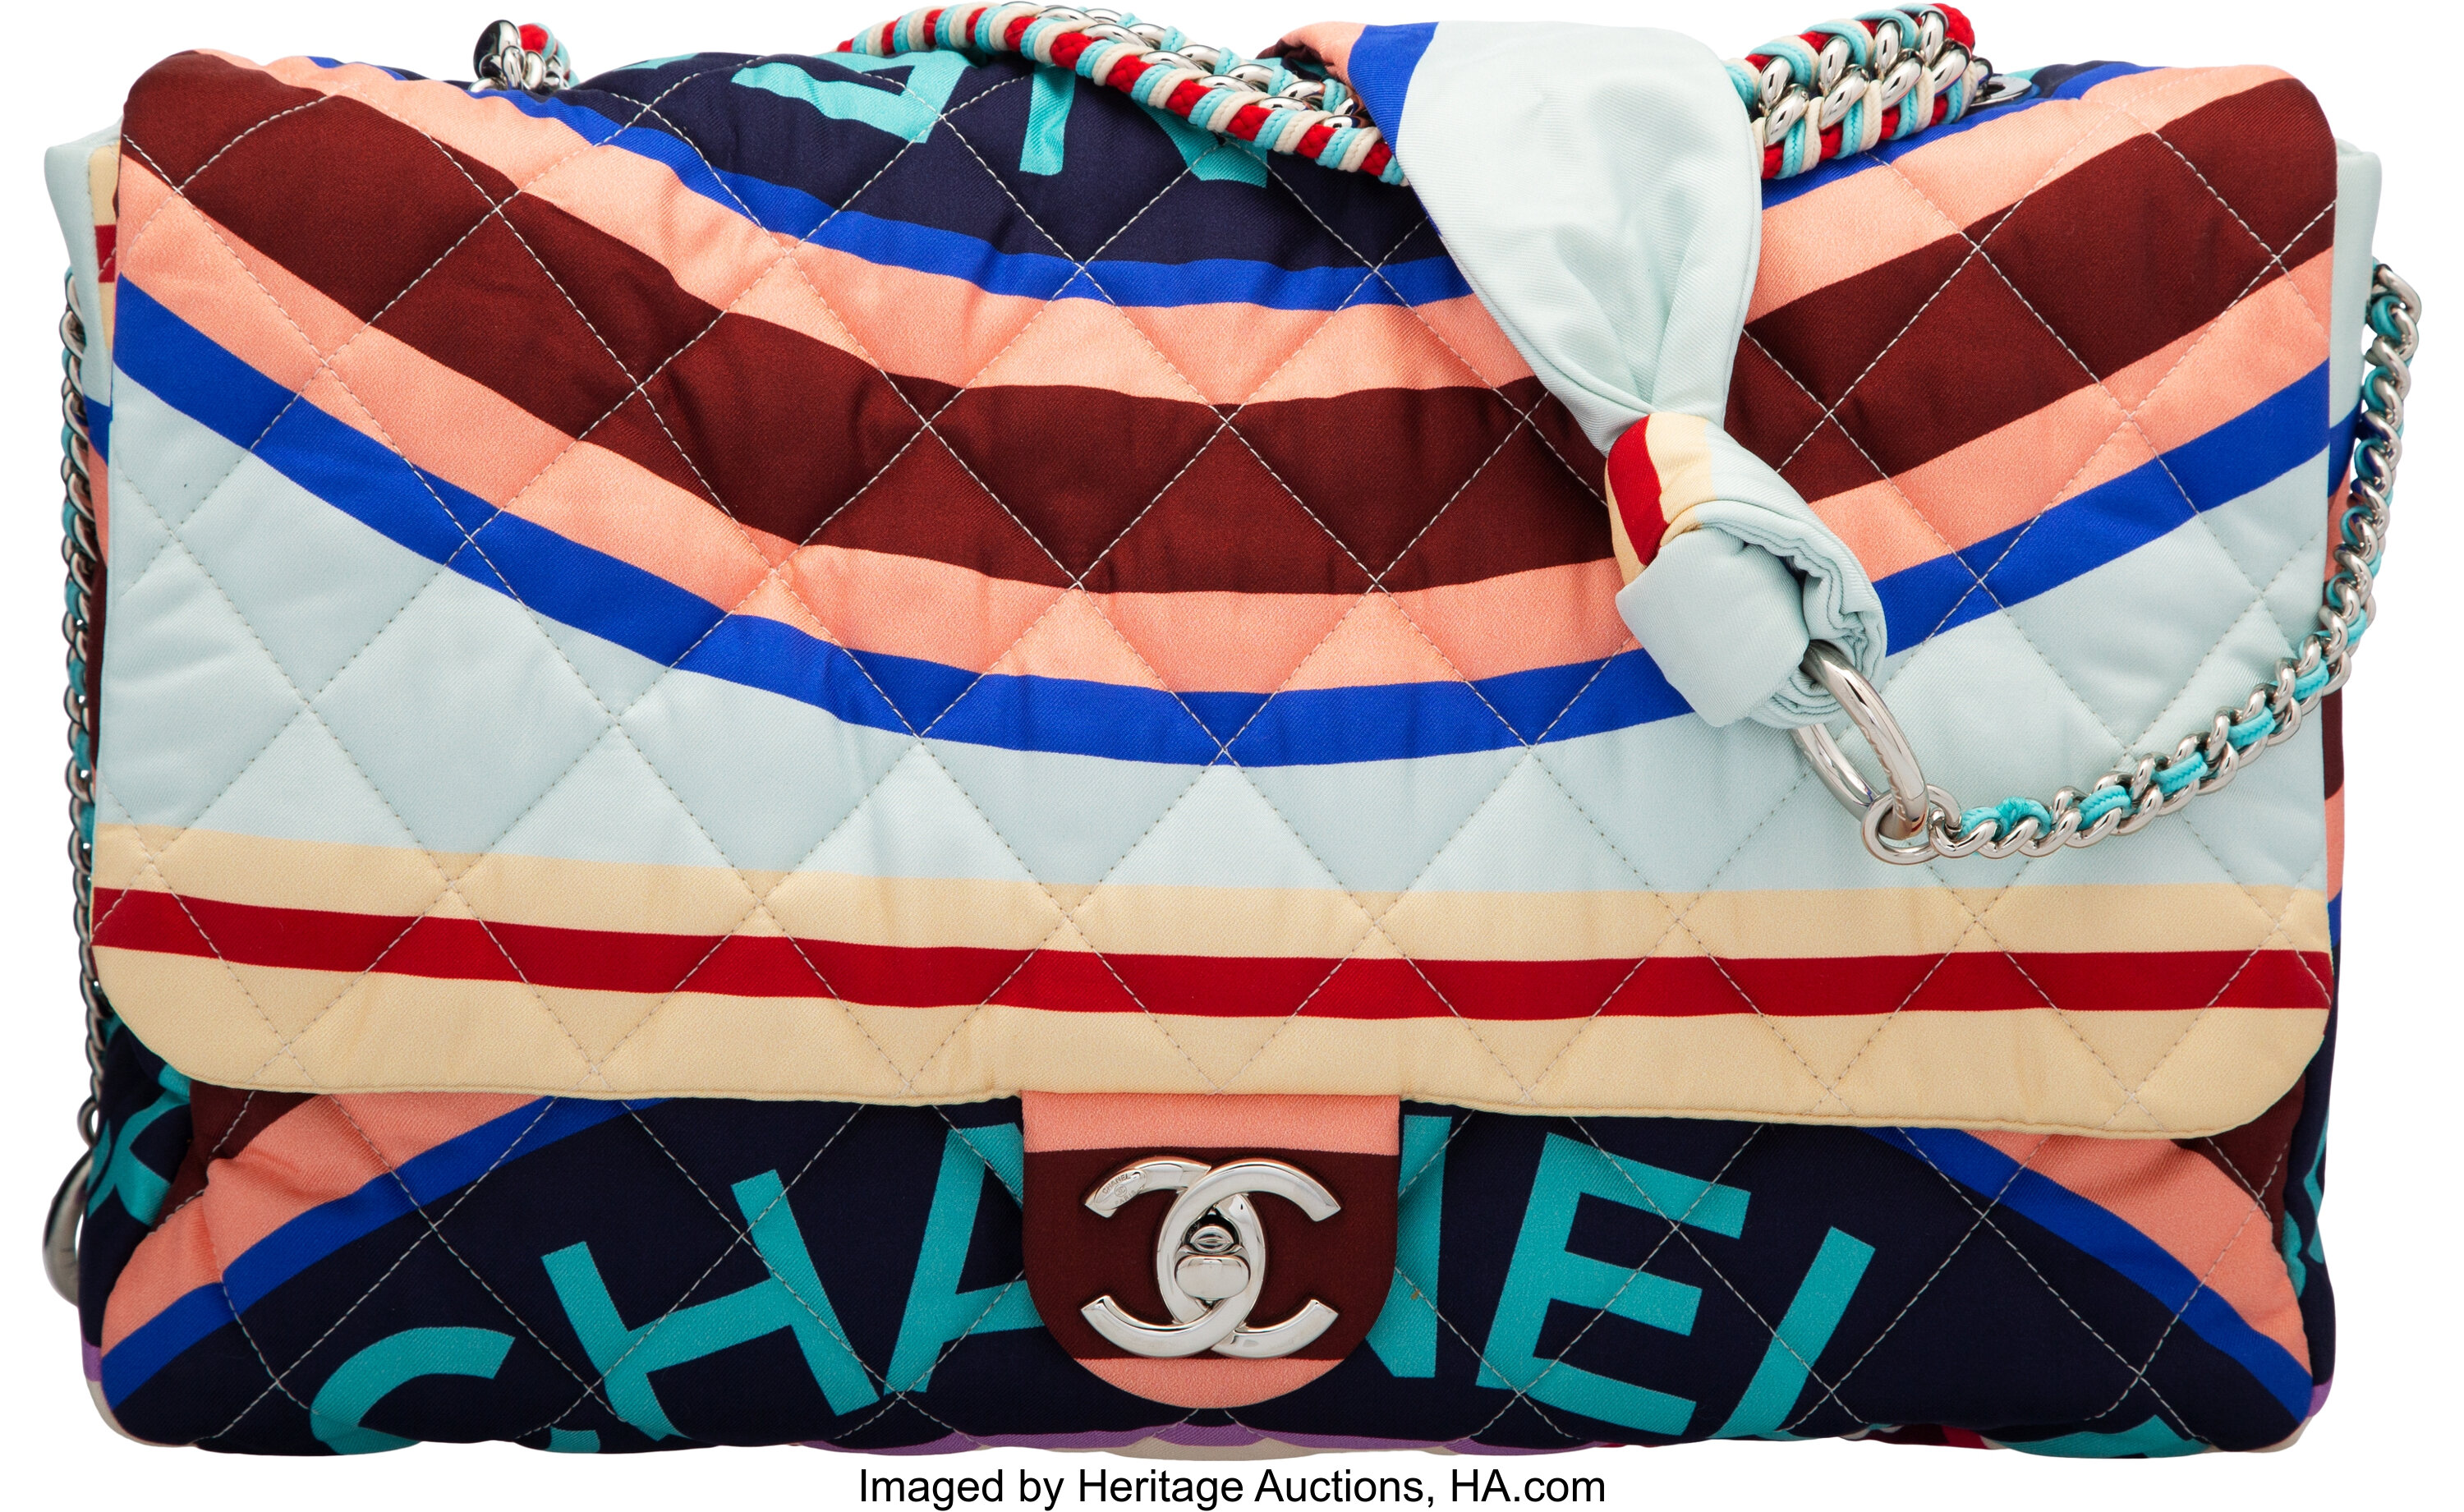 VINTAGE CHANEL BAG WITH PATENT FRINGING QUILTED MULTI COLOUR FABRIC